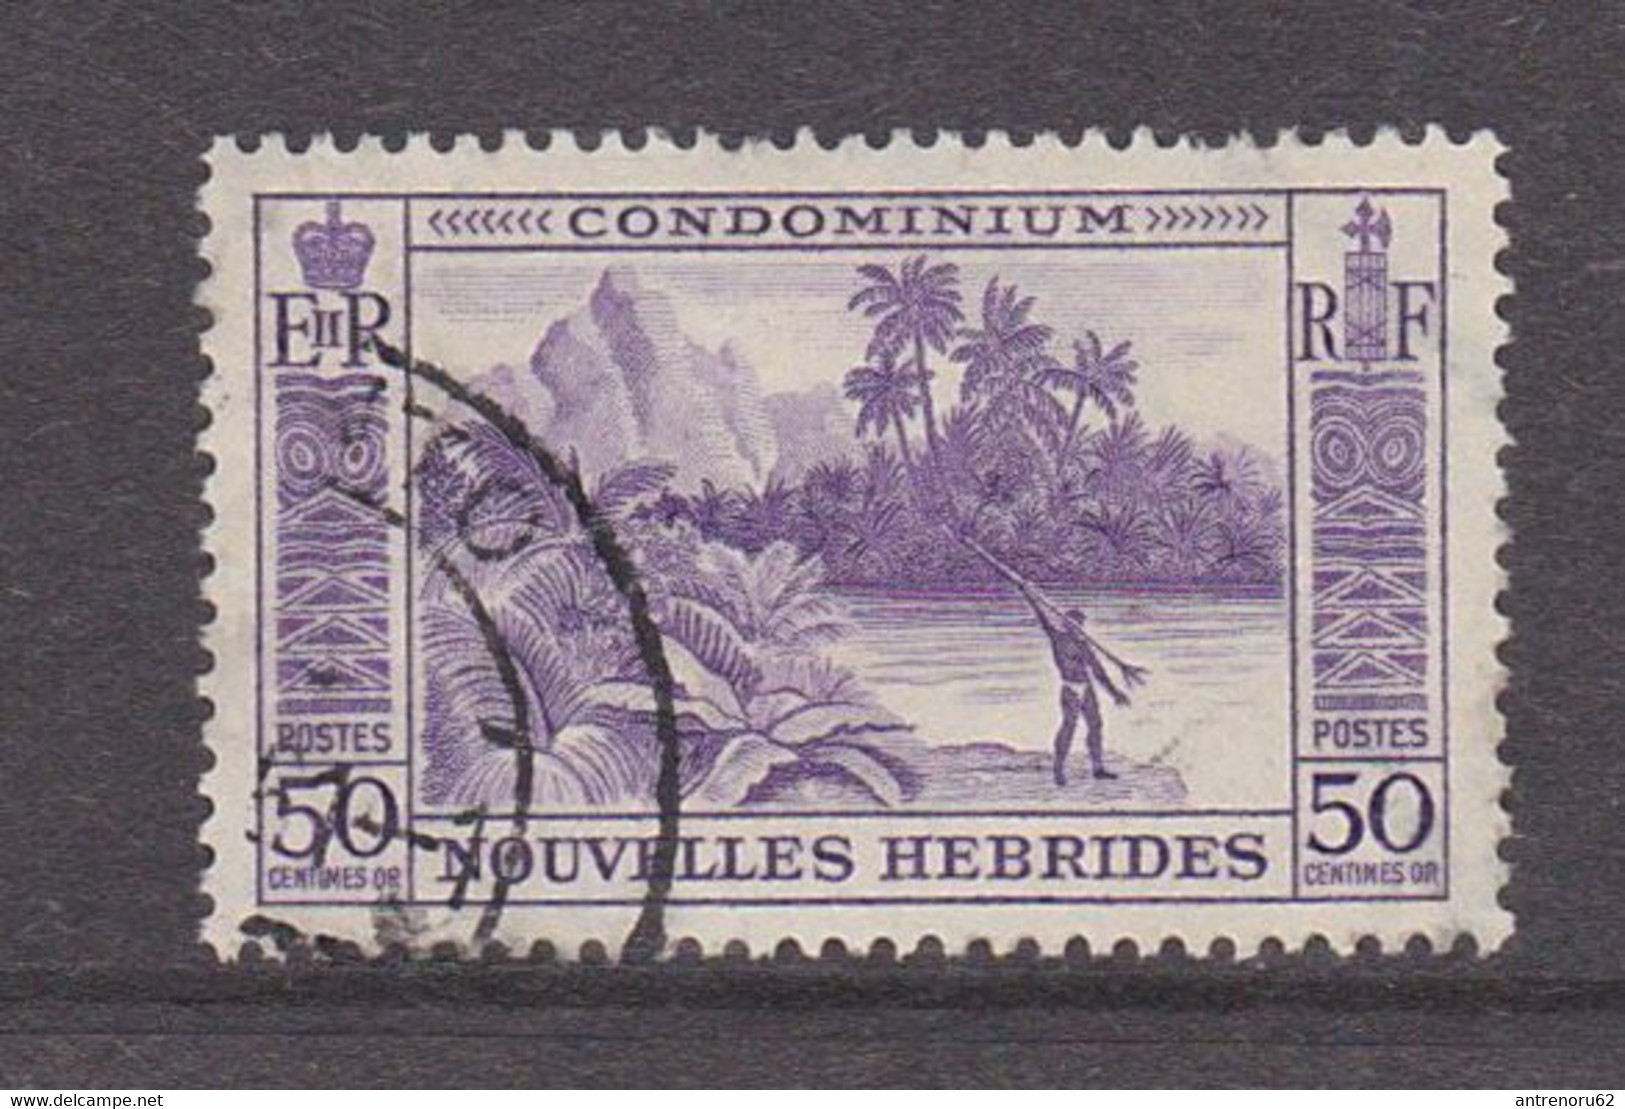 STAMPS-NEW-HEBRIDES-USED-SEE-SCAN - Used Stamps